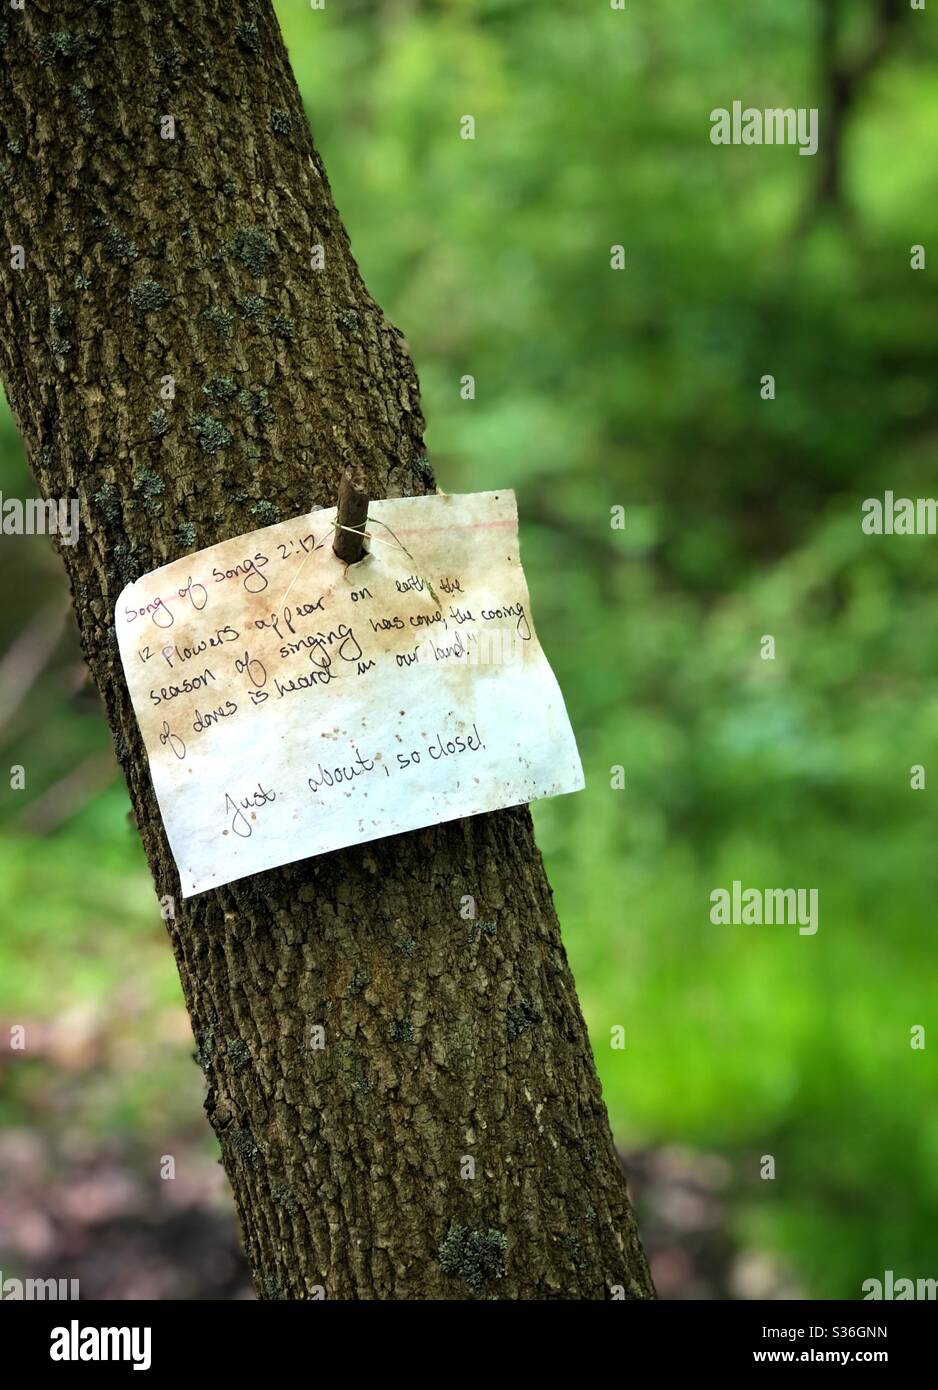 A bible verse about spring tacked onto a tree in the forest Stock Photo